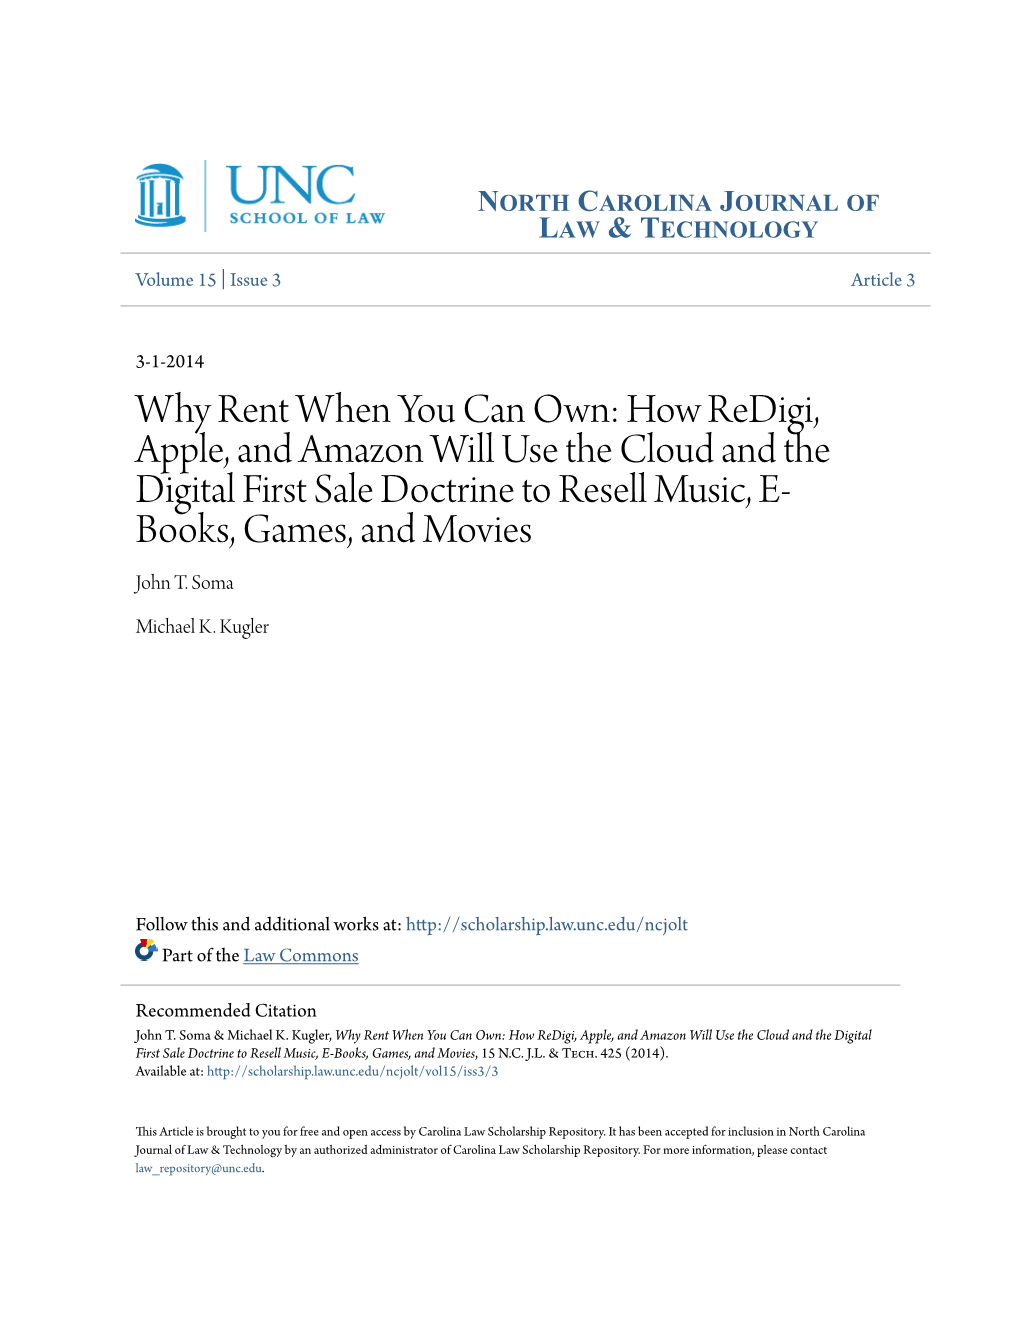 Why Rent When You Can Own: How Redigi, Apple, and Amazon Will Use the Cloud and the Digital First Sale Doctrine to Resell Music, E- Books, Games, and Movies John T